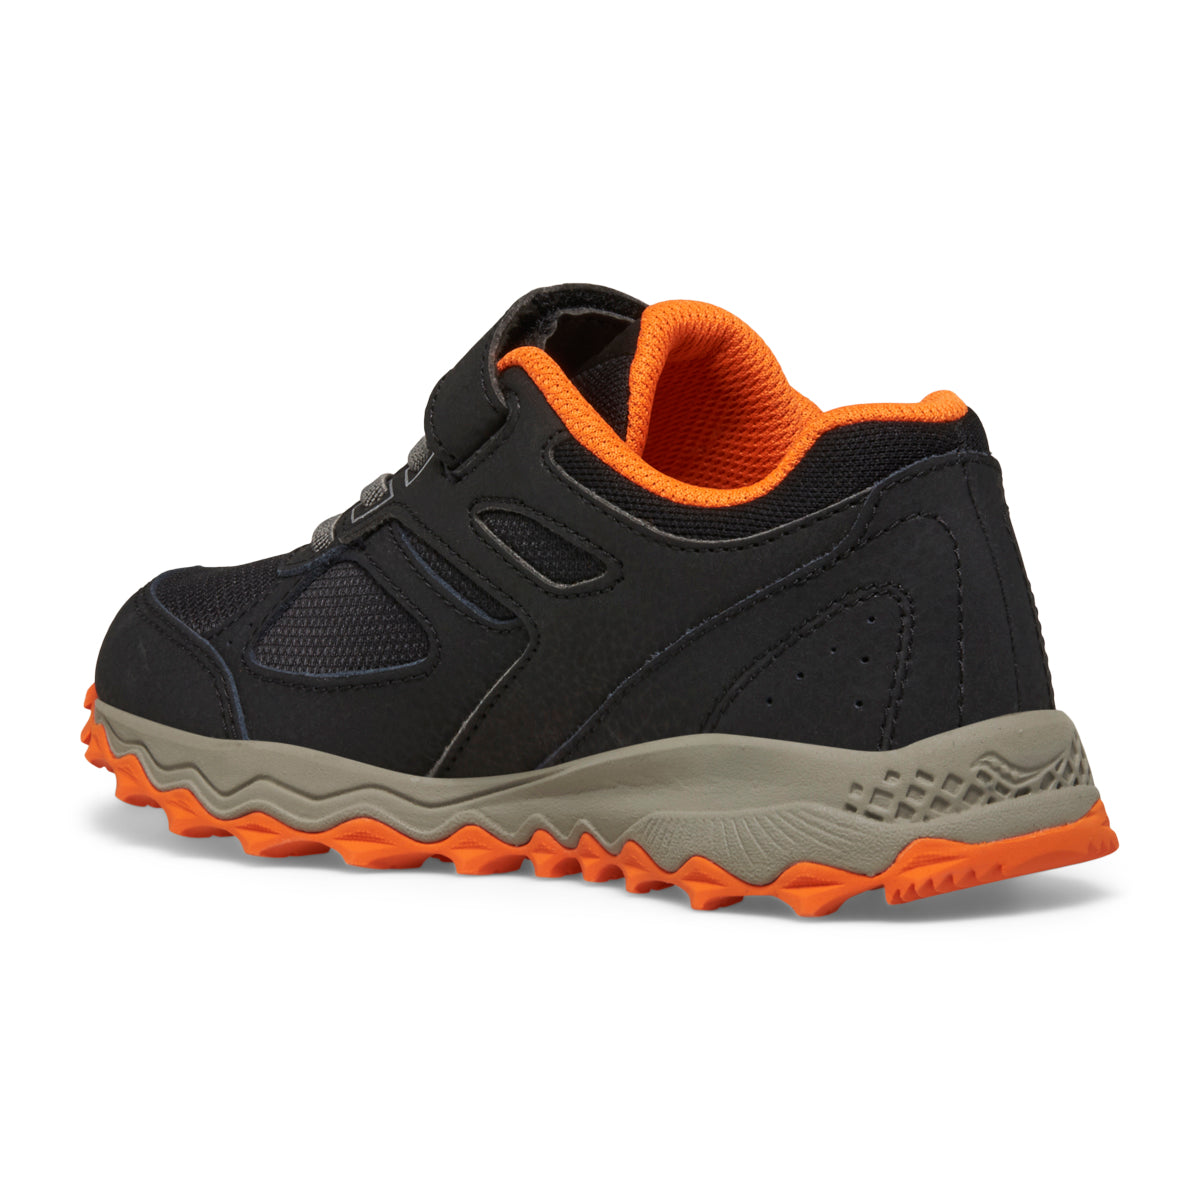 Cohesion Tr14 A/C Sneaker